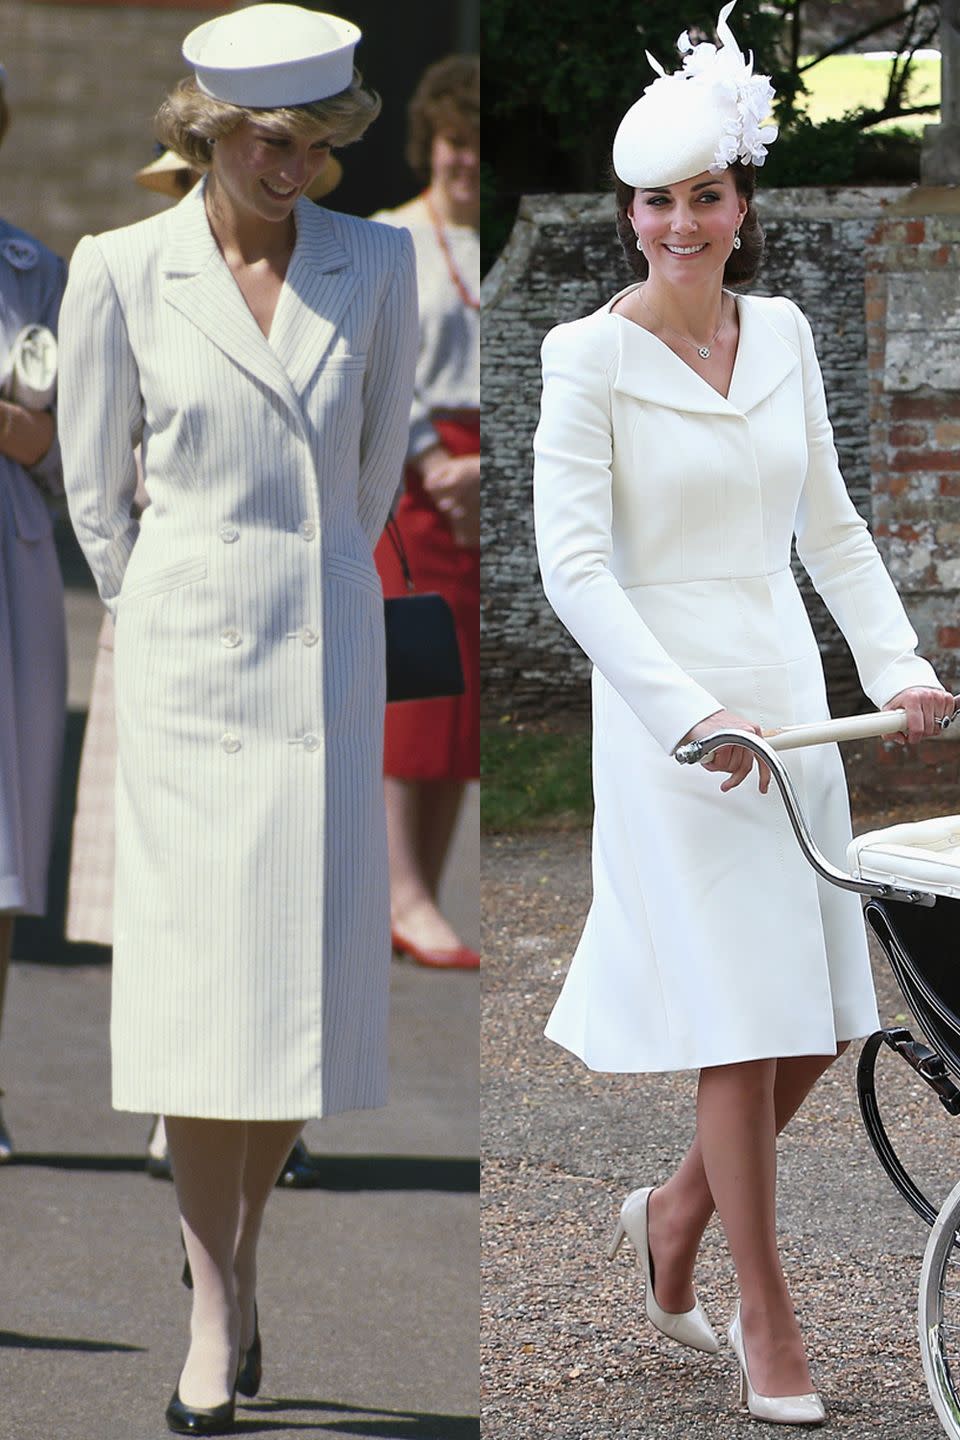 Here's Every Time Kate Middleton Gave Us Major Princess Diana Style Vibes